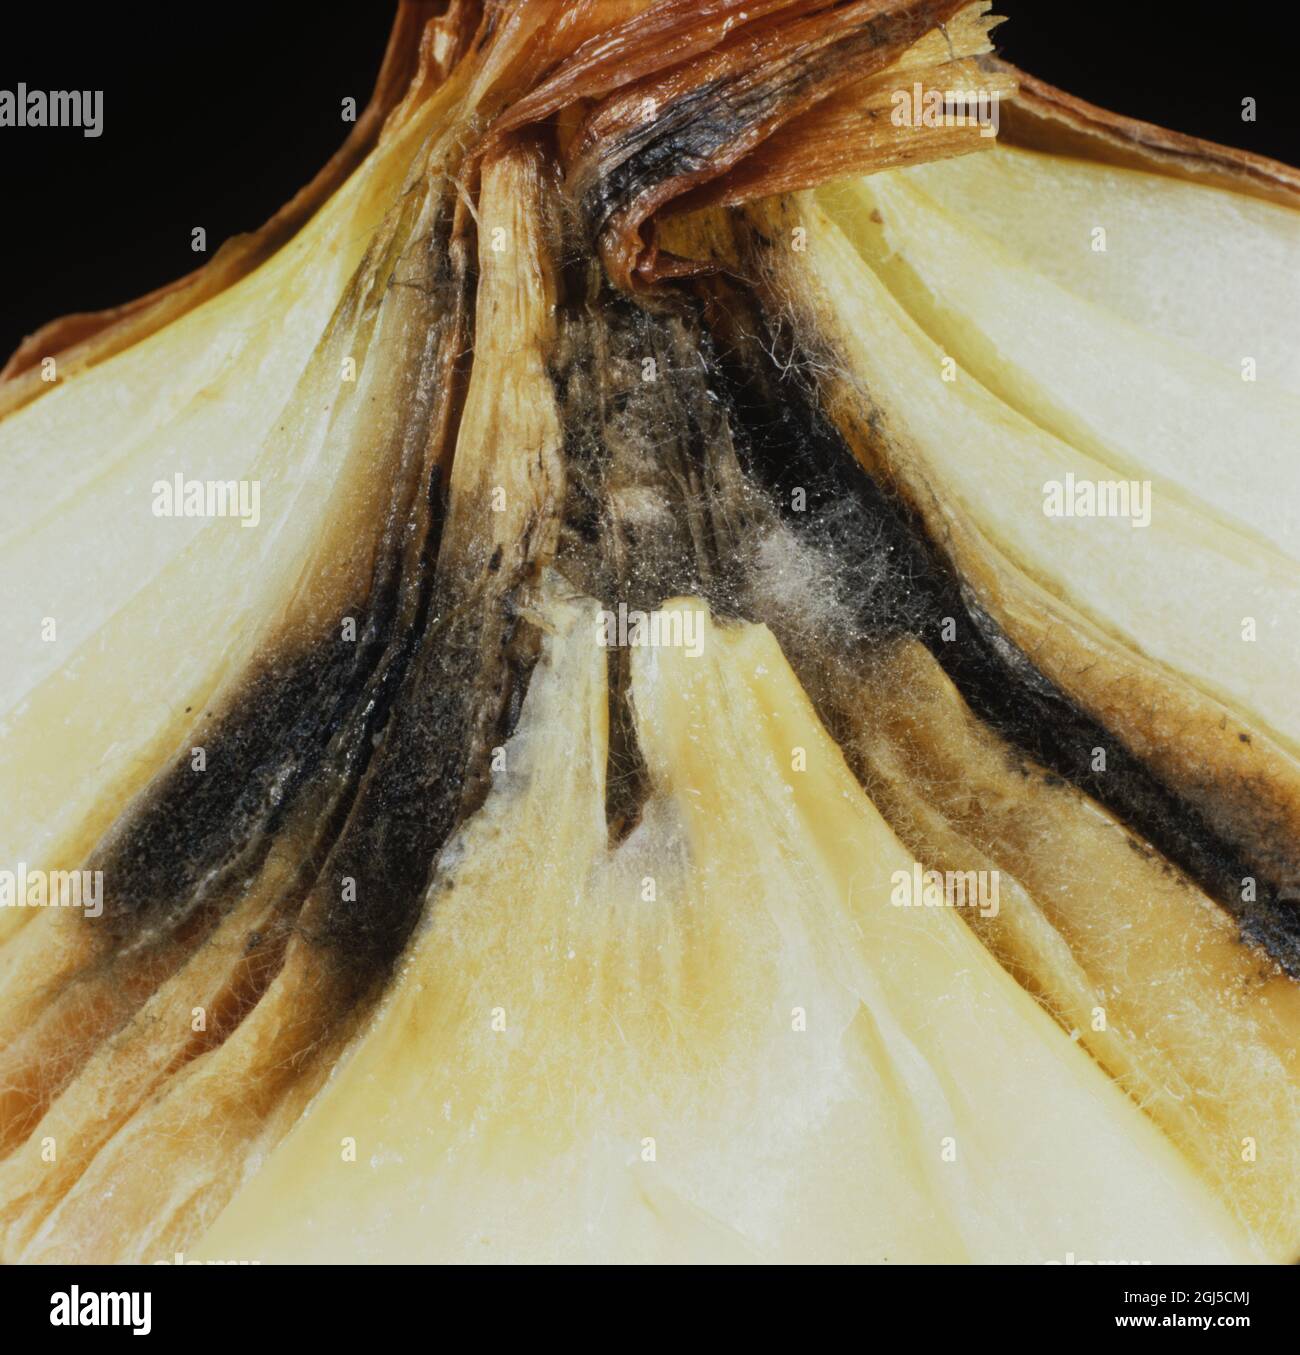 Neck rot (Botrytis allii) showing fungus infection in an onion bulb section Stock Photo